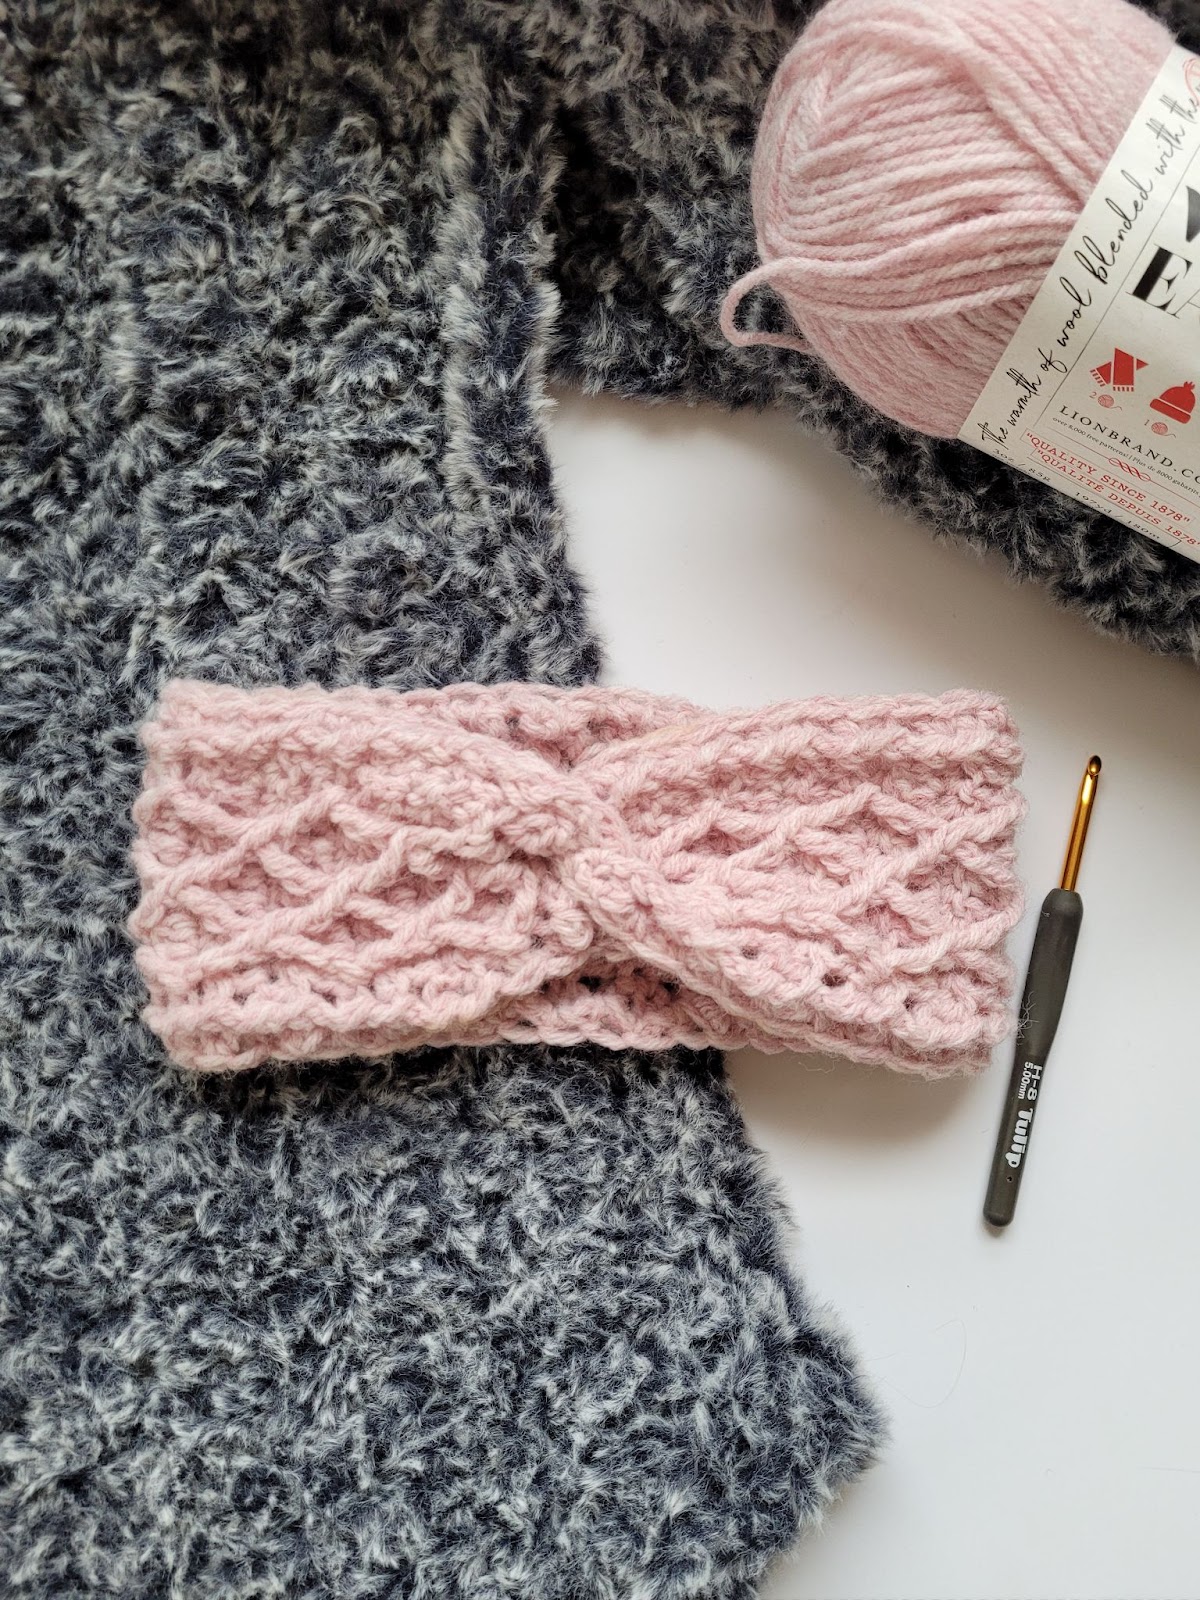 Wip Wednesday Crochet Along - The Molly Cabled Blanket